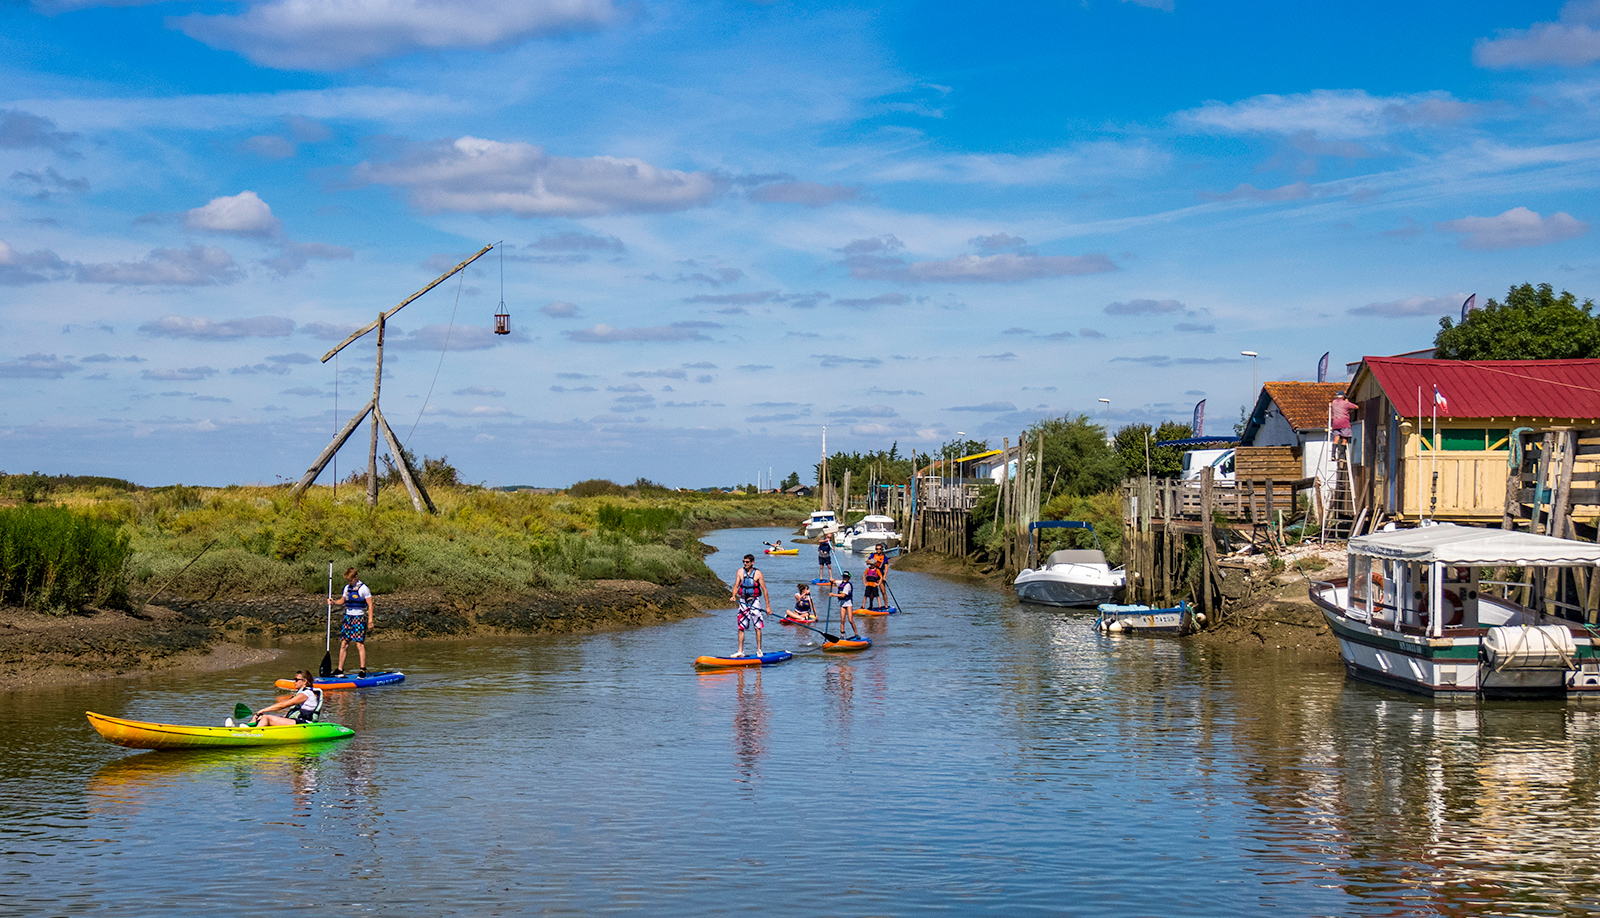 Water sports - Paddles and kayaks at the port of Mornac-sur-Seudre